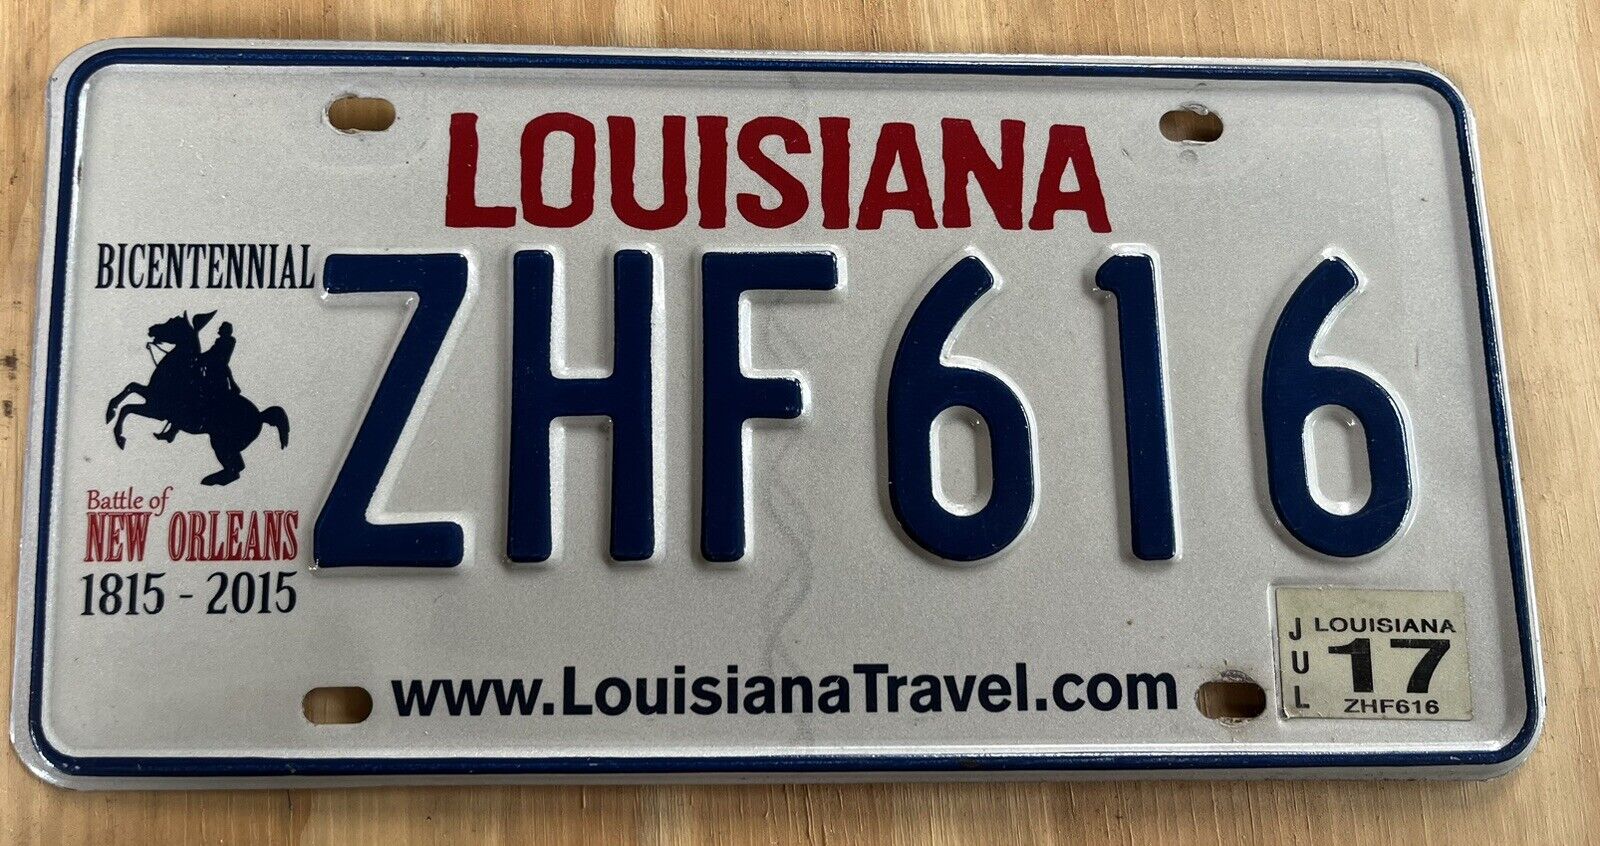 Louisiana License Plate New Orleans Bicentennial 1815-2015 Expired 2017 ZHF616